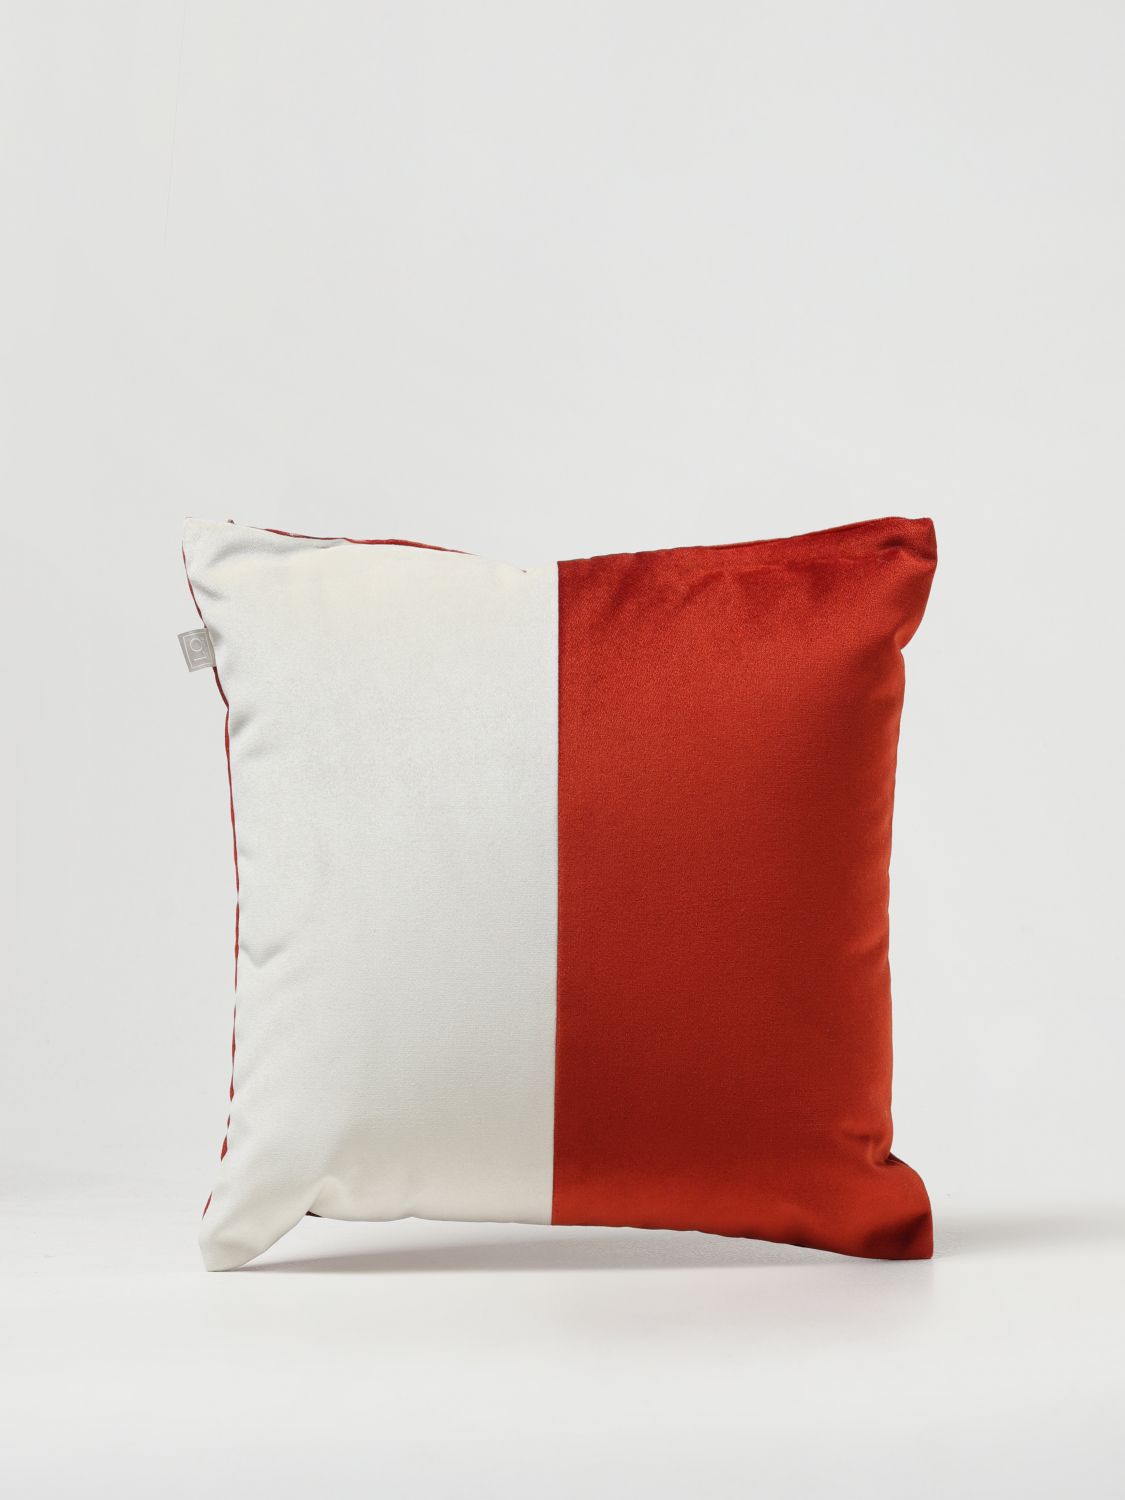  Cushions LO DECOR Lifestyle color Red